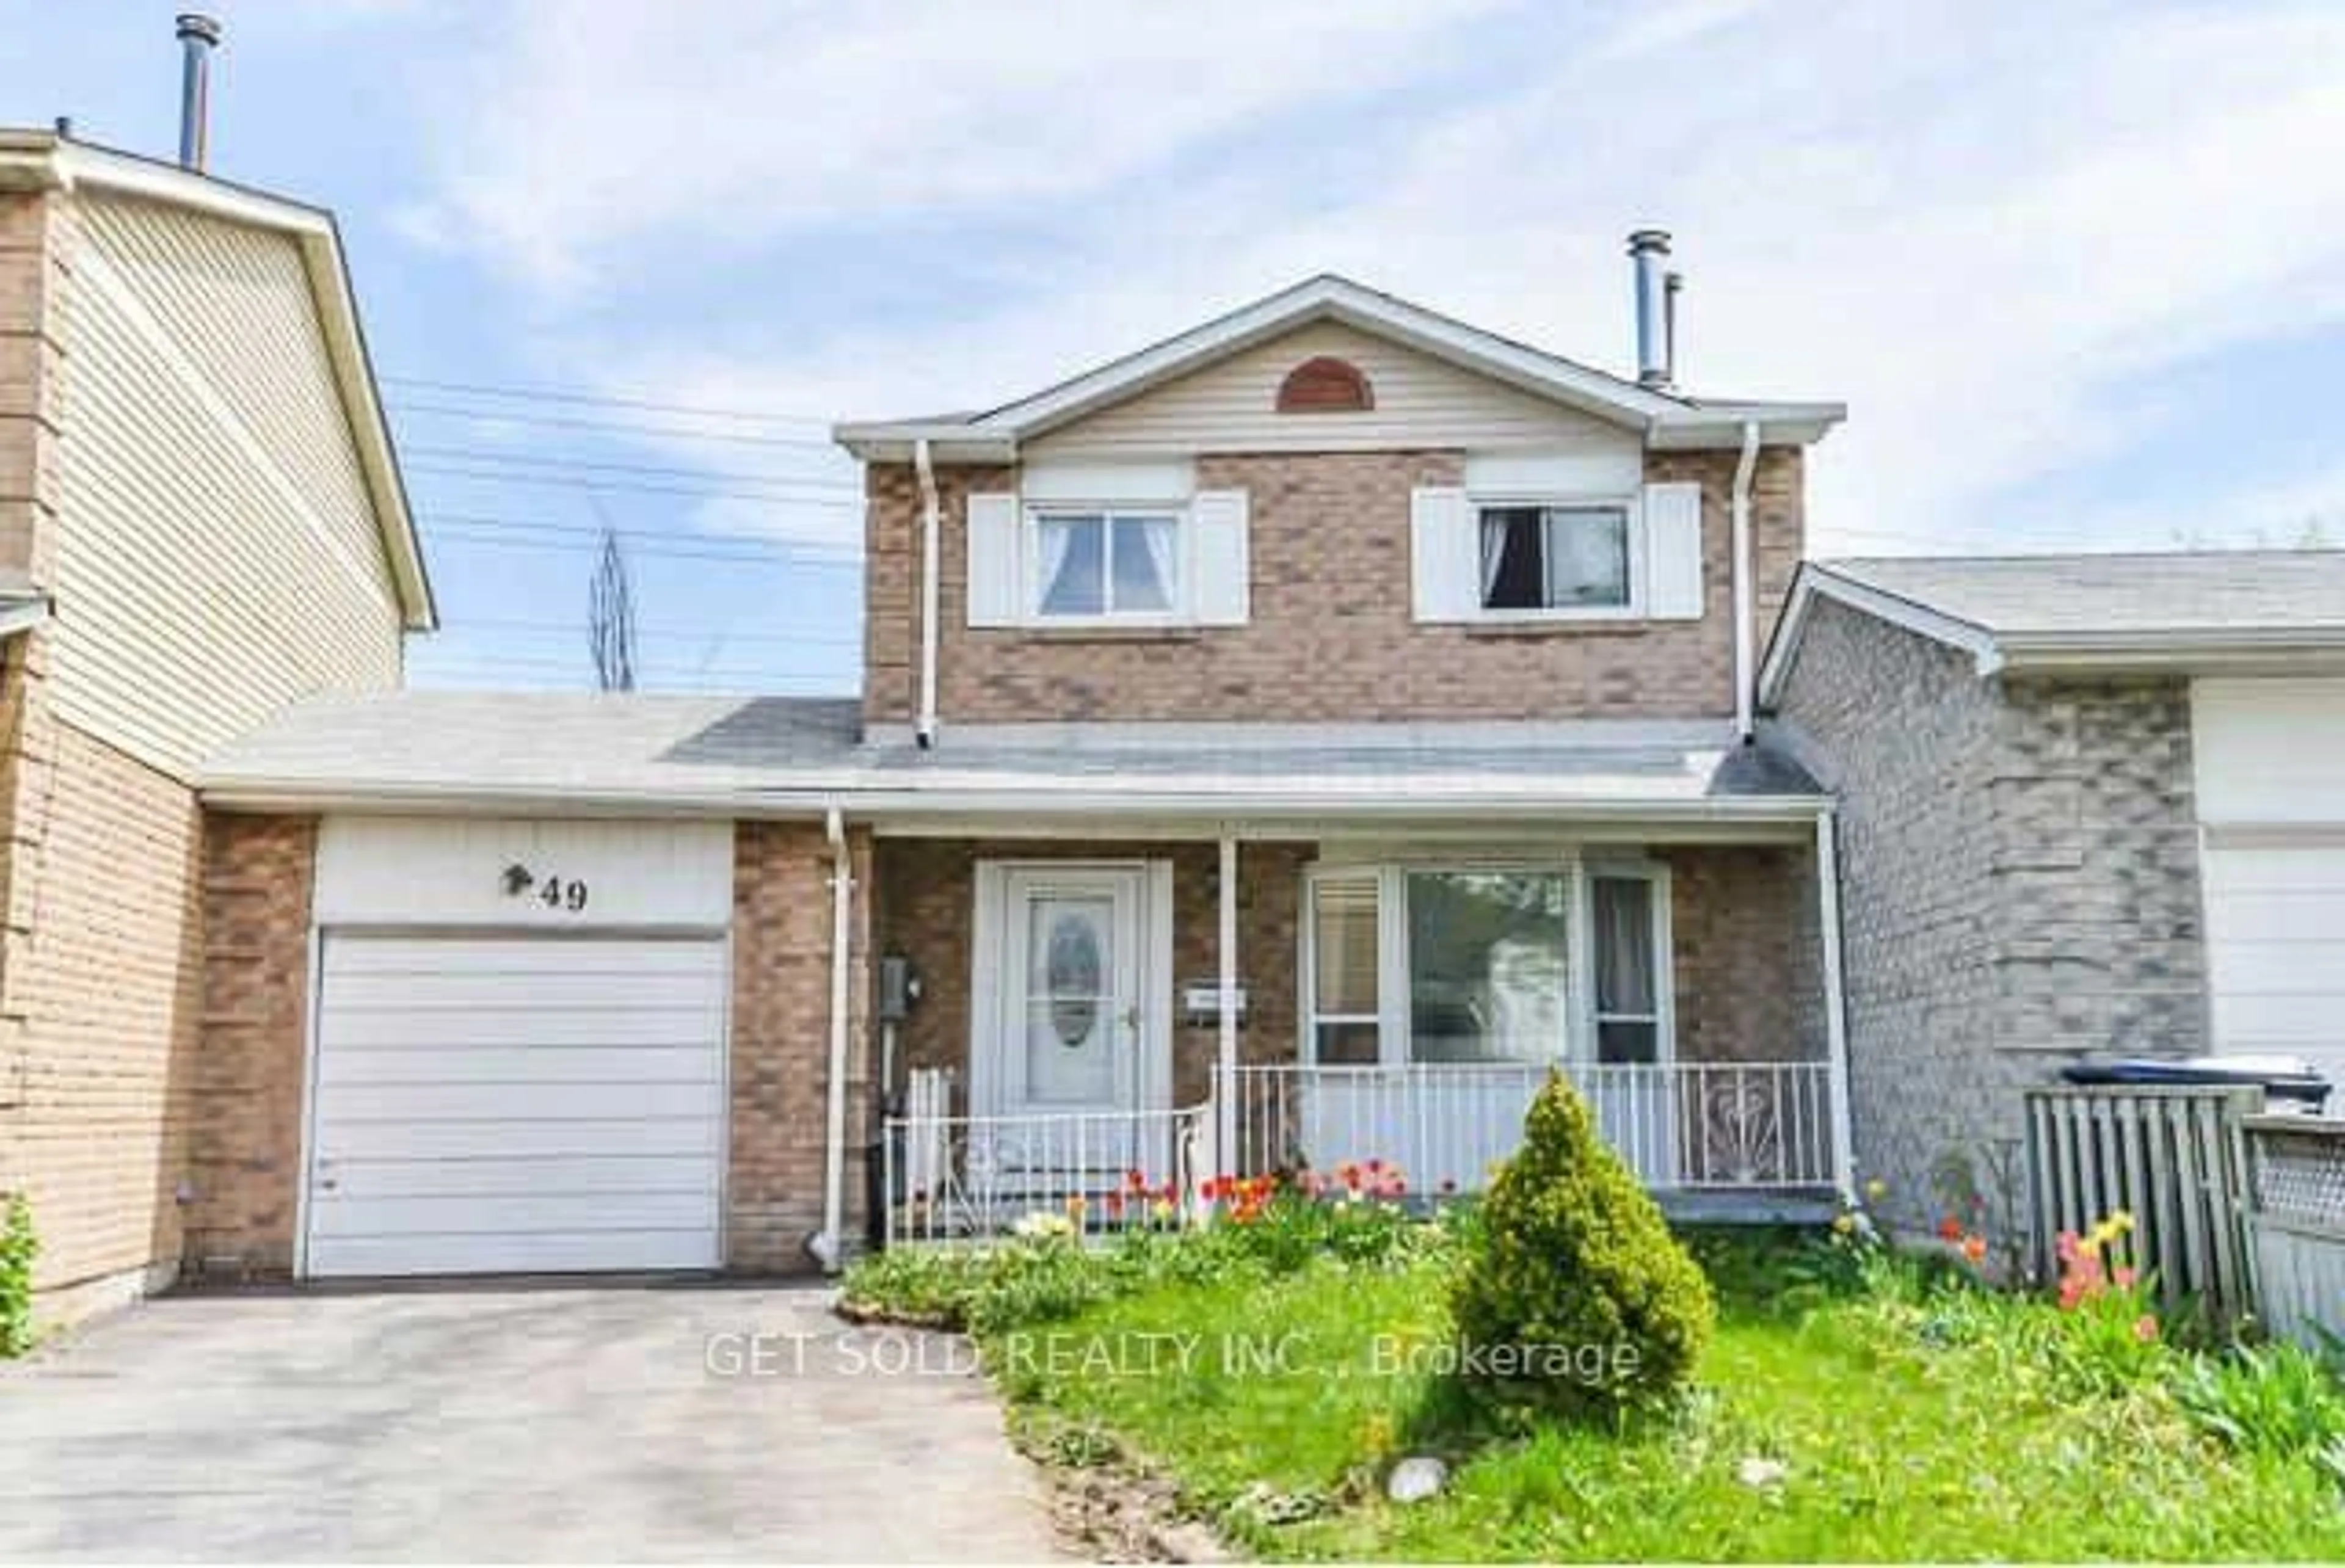 Frontside or backside of a home for 49 Briarwood Ave, Toronto Ontario M9W 6C9